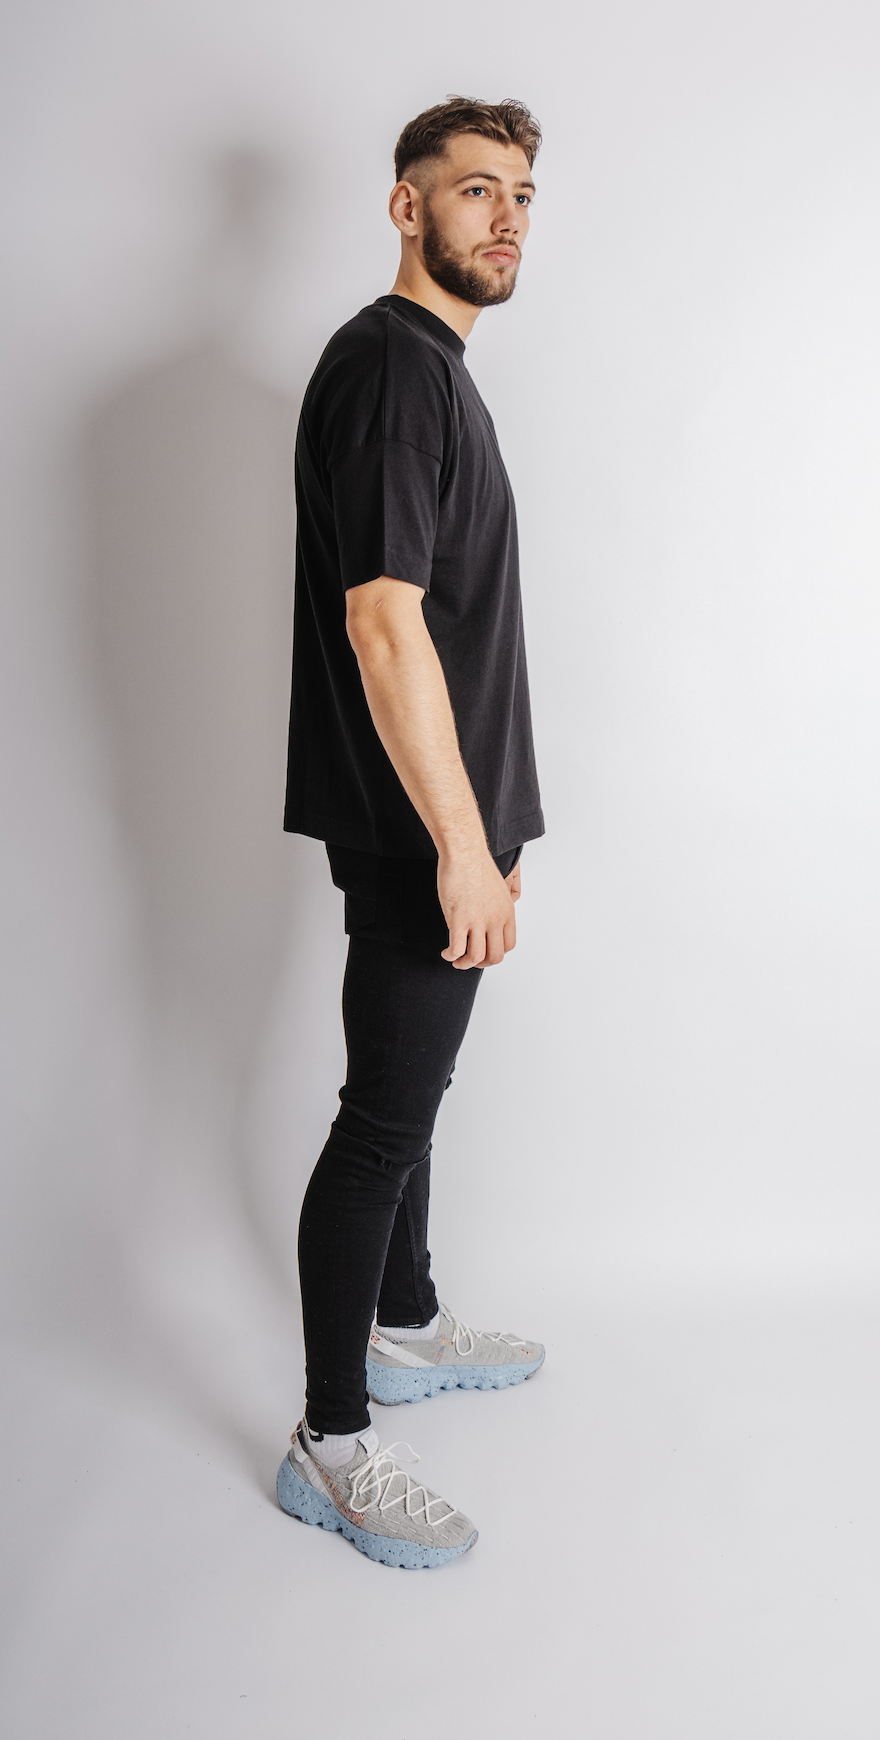 'good things' black t-shirt - oversized fit